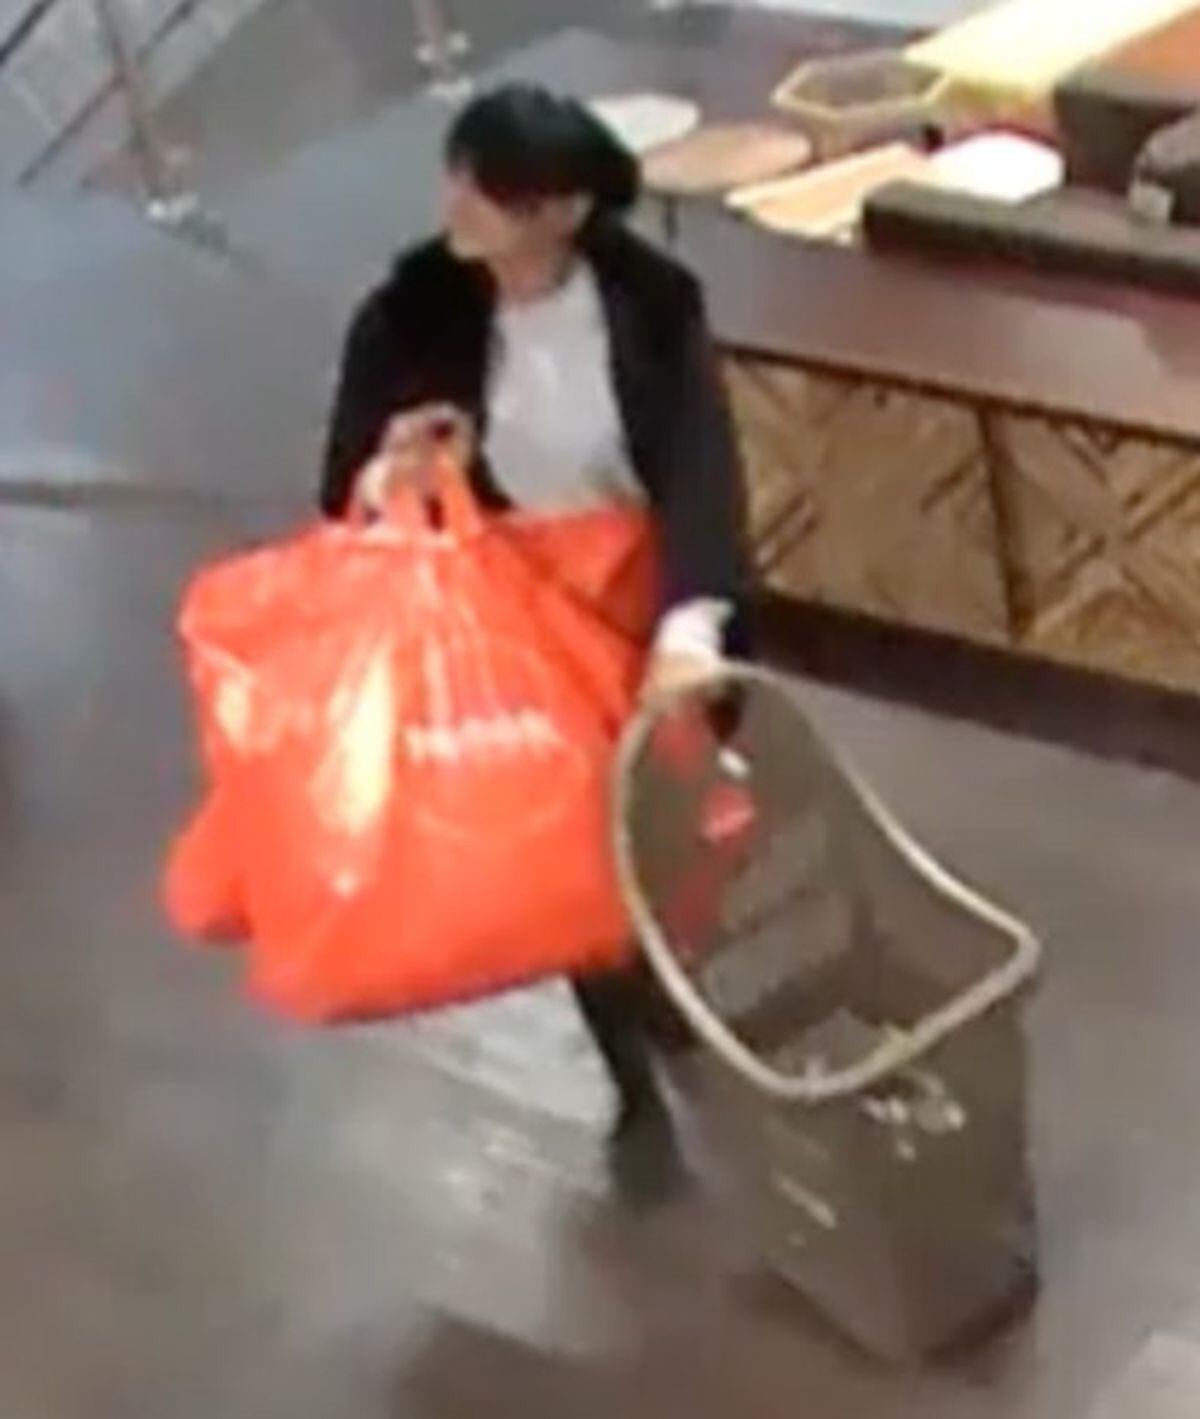 Narinder Kaur was caught on CCTV at a TK Maxx store as she defrauded the retailer. Photo: CPS